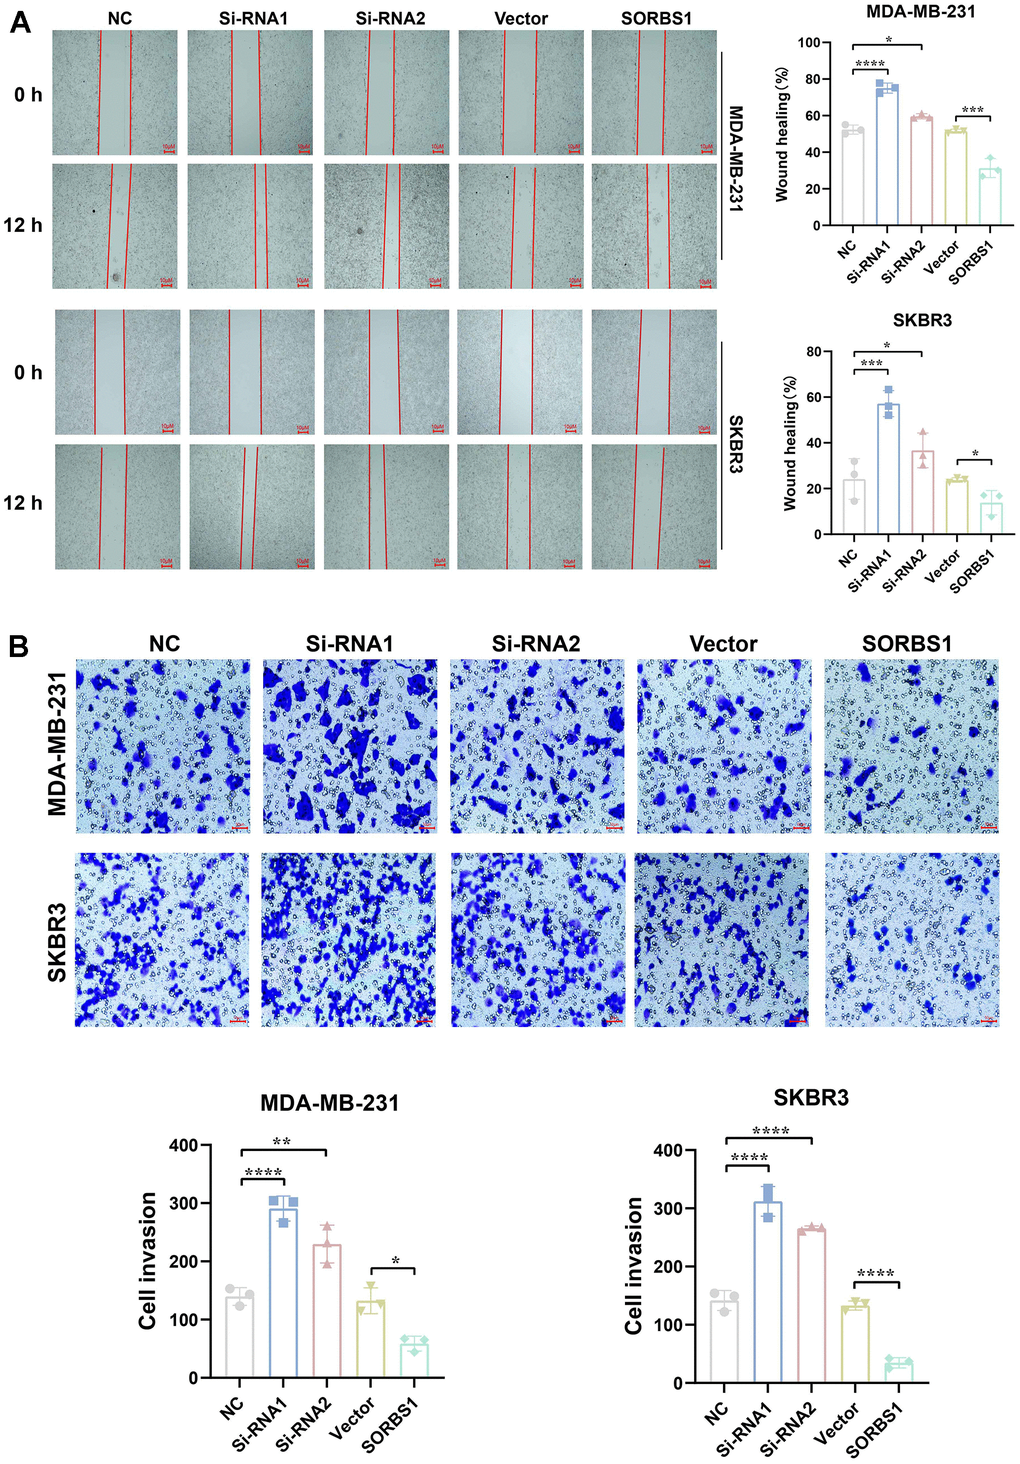 SORBS1 inhibits MDA-MB-231 and SKBR3 cell invasion and migration. MDA-MB-231 and SKBR3 cells were transfected with SORBS1 overexpression plasmid and siRNA for 48 h. (A) Changes in the migratory ability of MDA-MB-231 and SKBR3 cells were detected by scratch assay. (B) Changes in the invasive ability of MDA-MB-231 and SKBR3 cells were detected by transwell assay (*P **P ***P ****P 